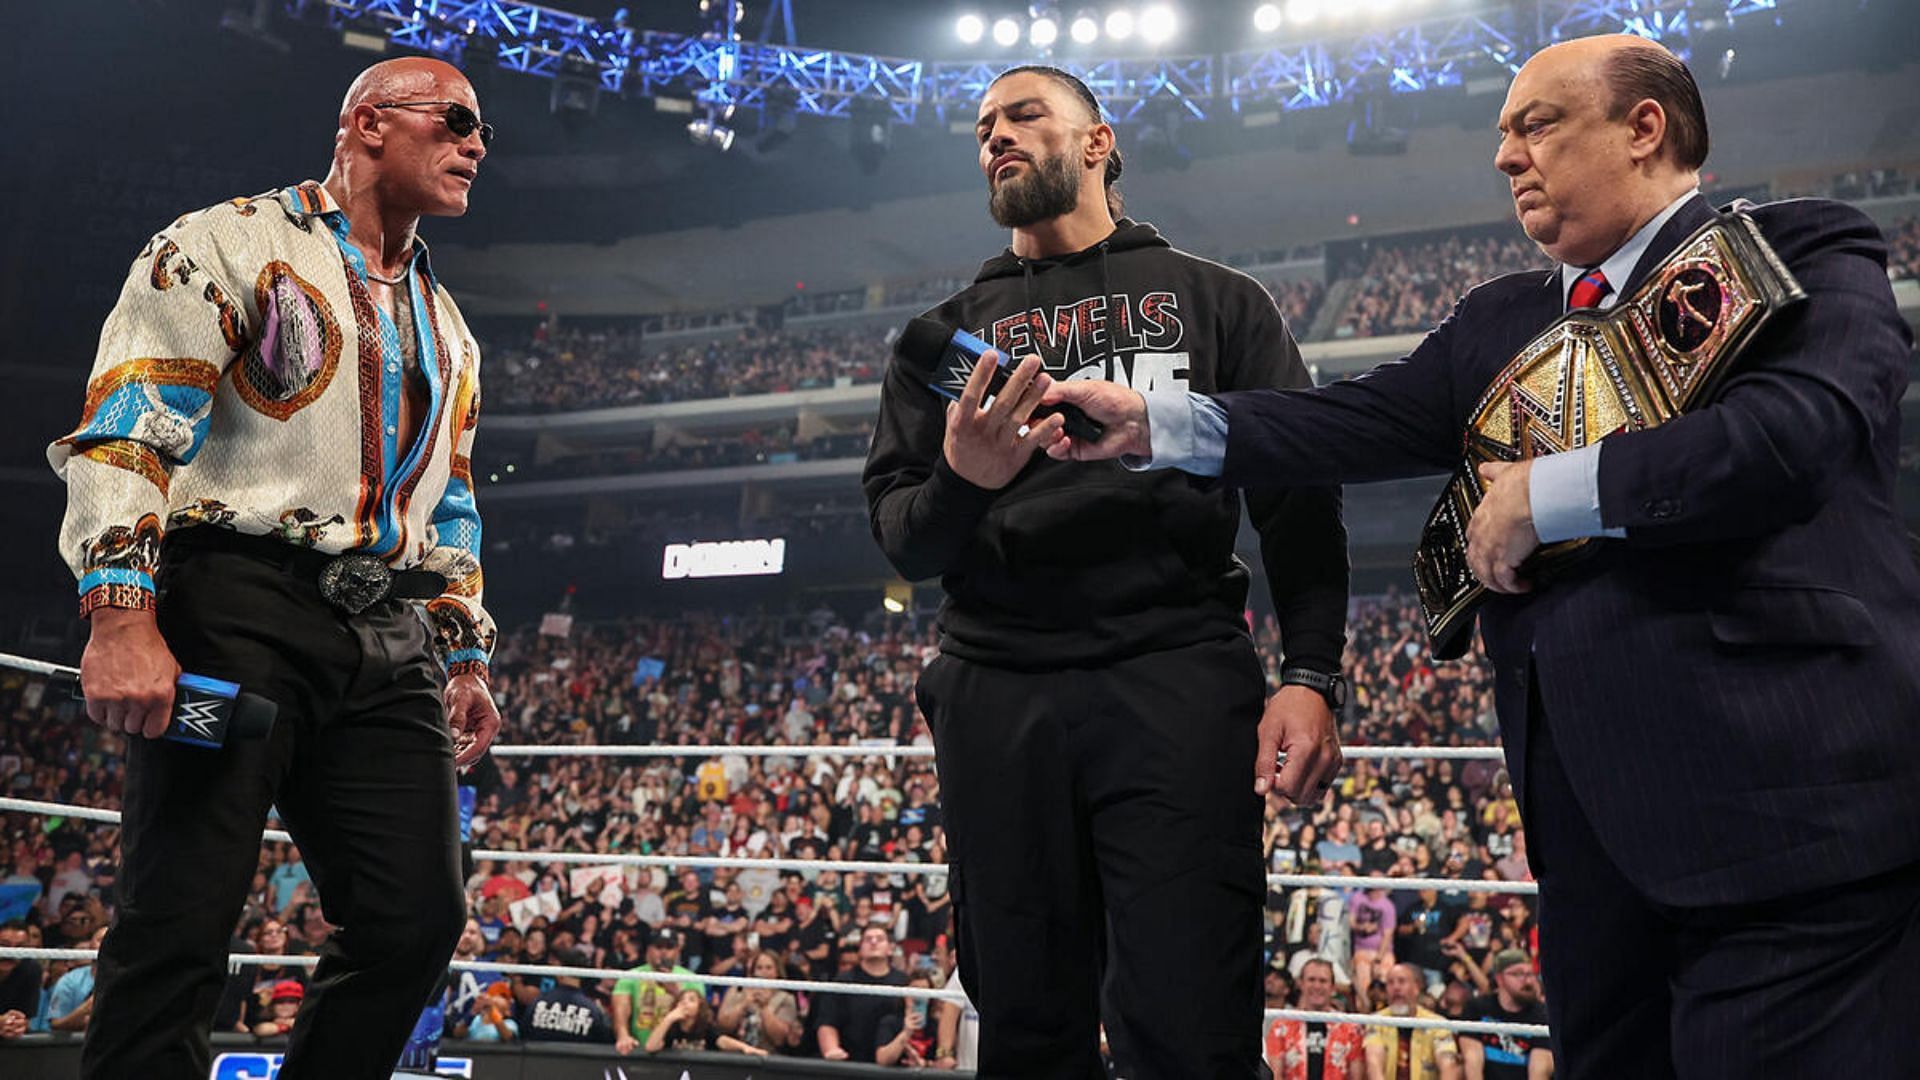 The Rock, Roman Reigns, and Paul Heyman are Bloodline members